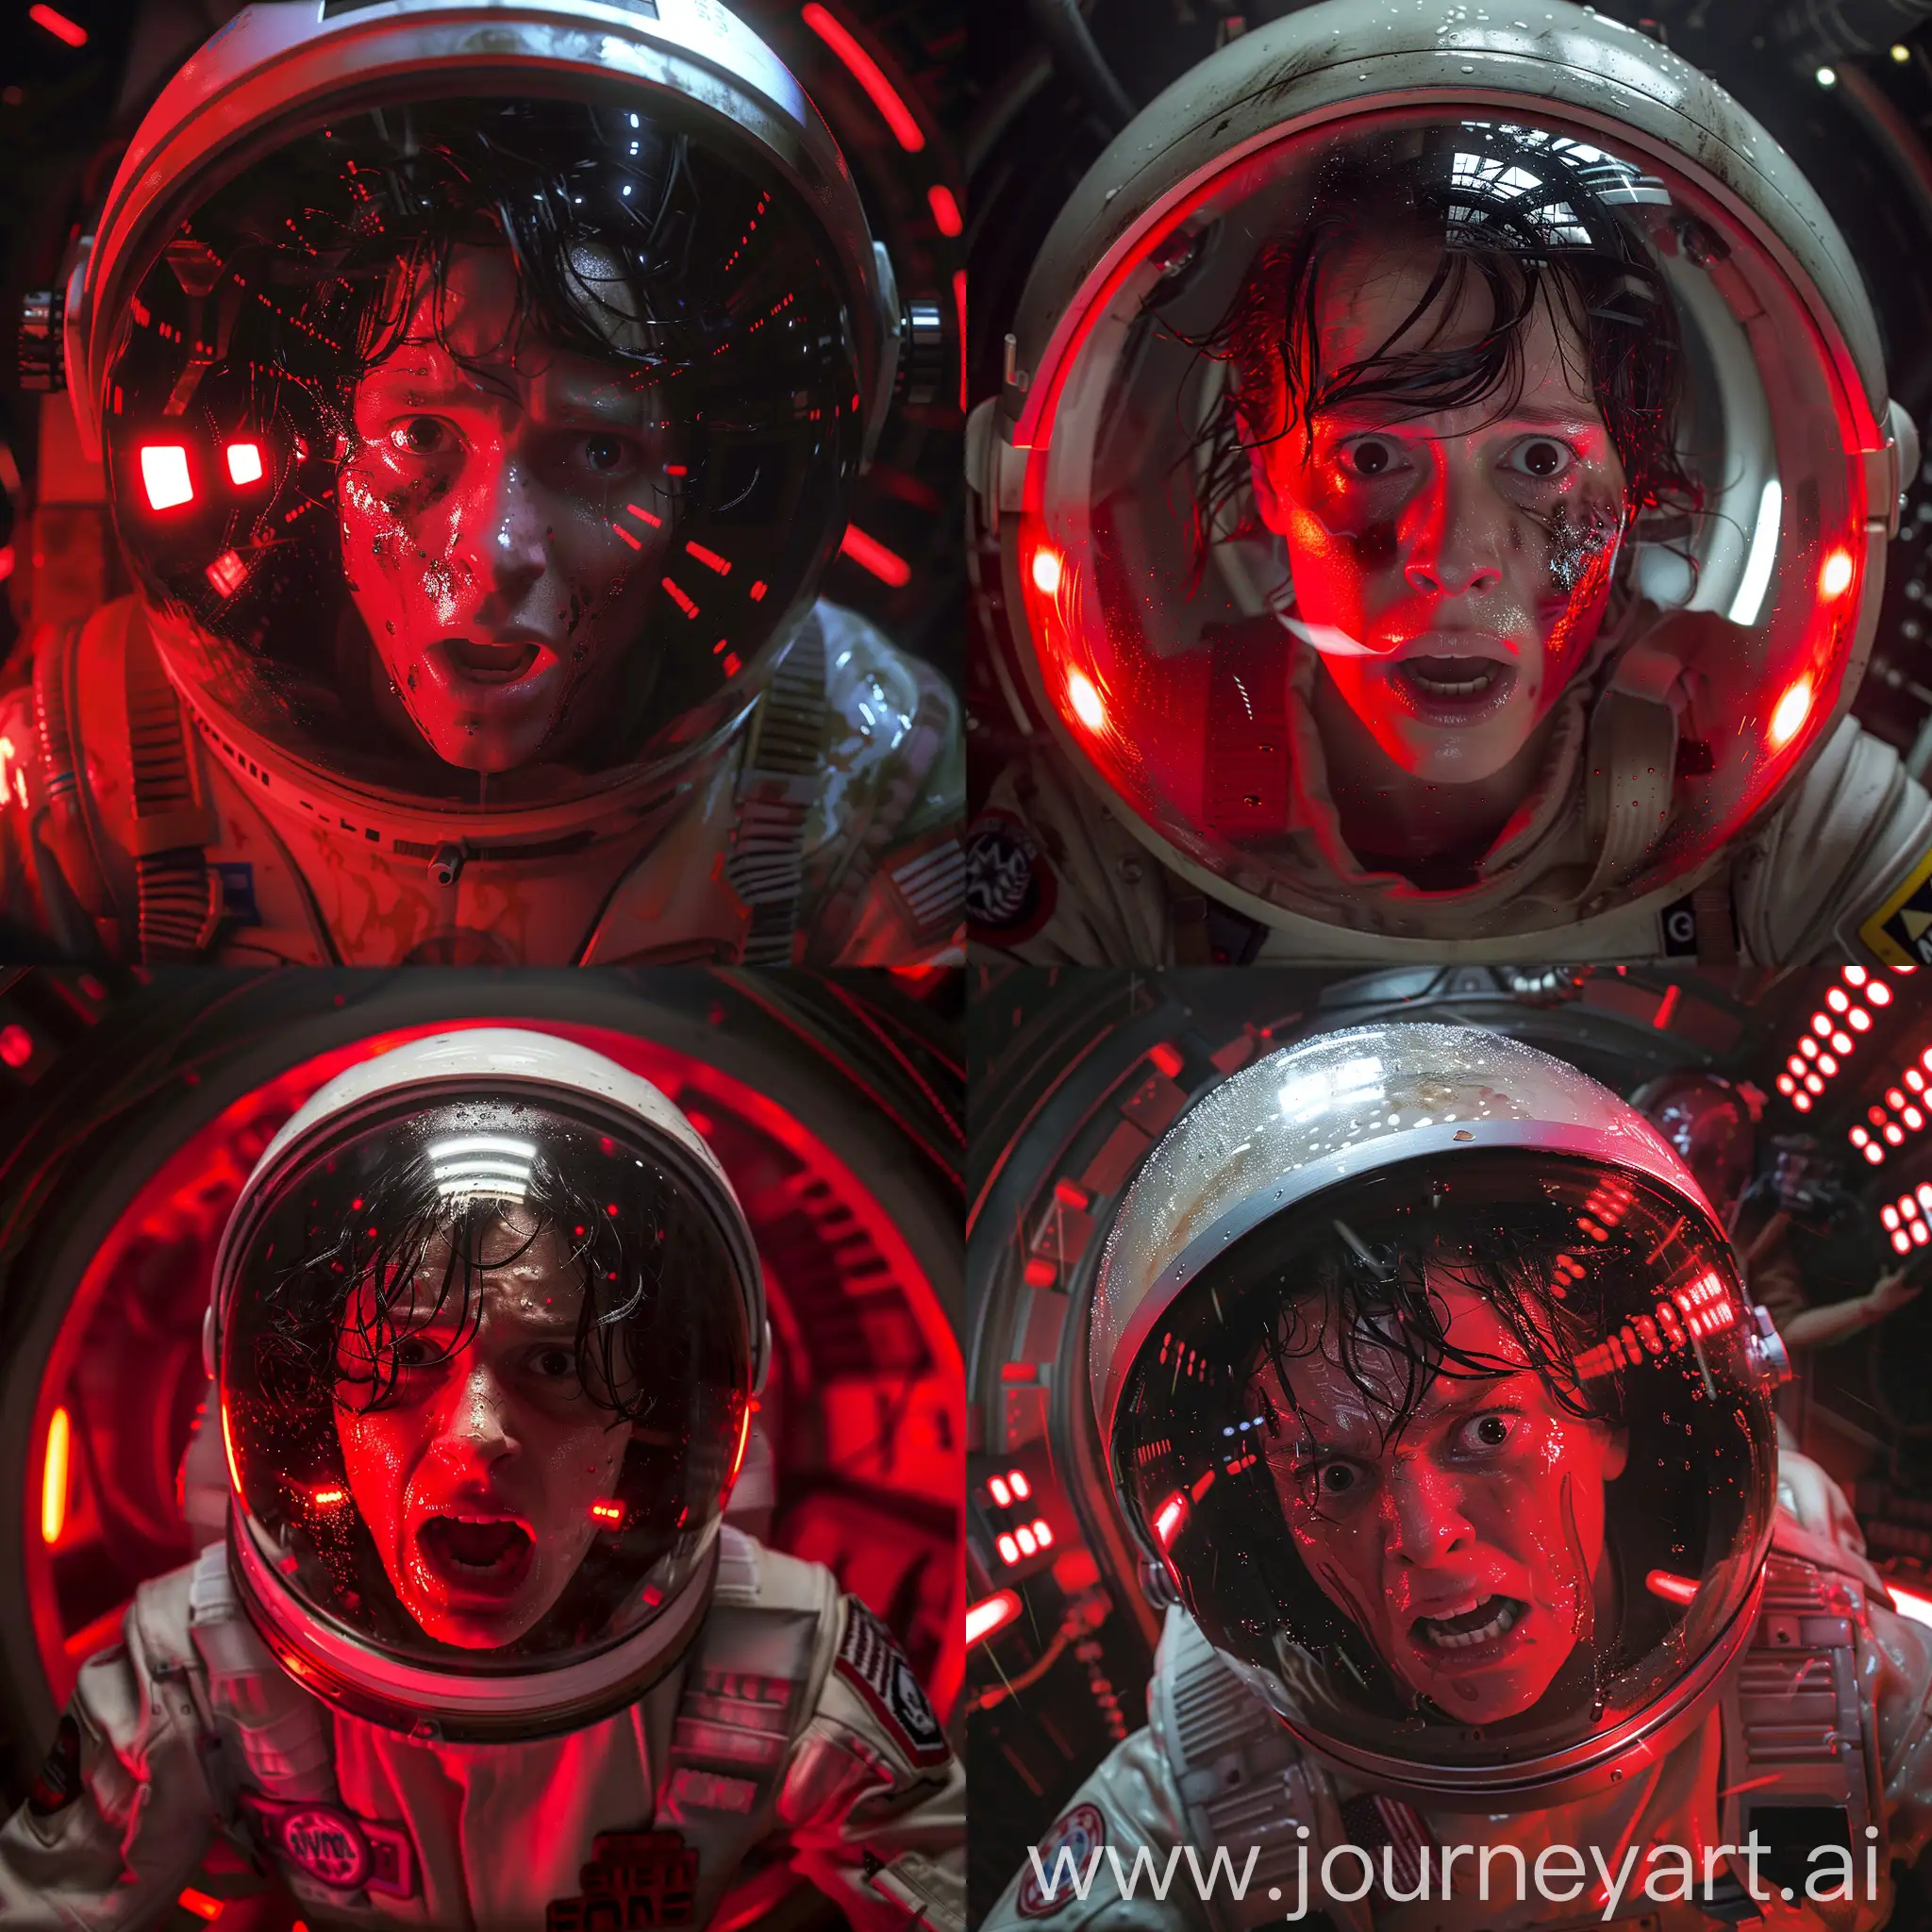 Cinematic Still scenes from New Movie of Alien, with Daisy Ridley, a character from the Alien films, wearing the astronaut uniform from the film Alien, in the claustrophobic, dense and dark interior of the Nostromo spaceship with red lights, with Daisy Ridley's face very scared with wet hair and very sweaty, with the reflection of the Alien in front of him reflecting on the visor of his astronaut helmet, 8k resolution,  cinematic image 